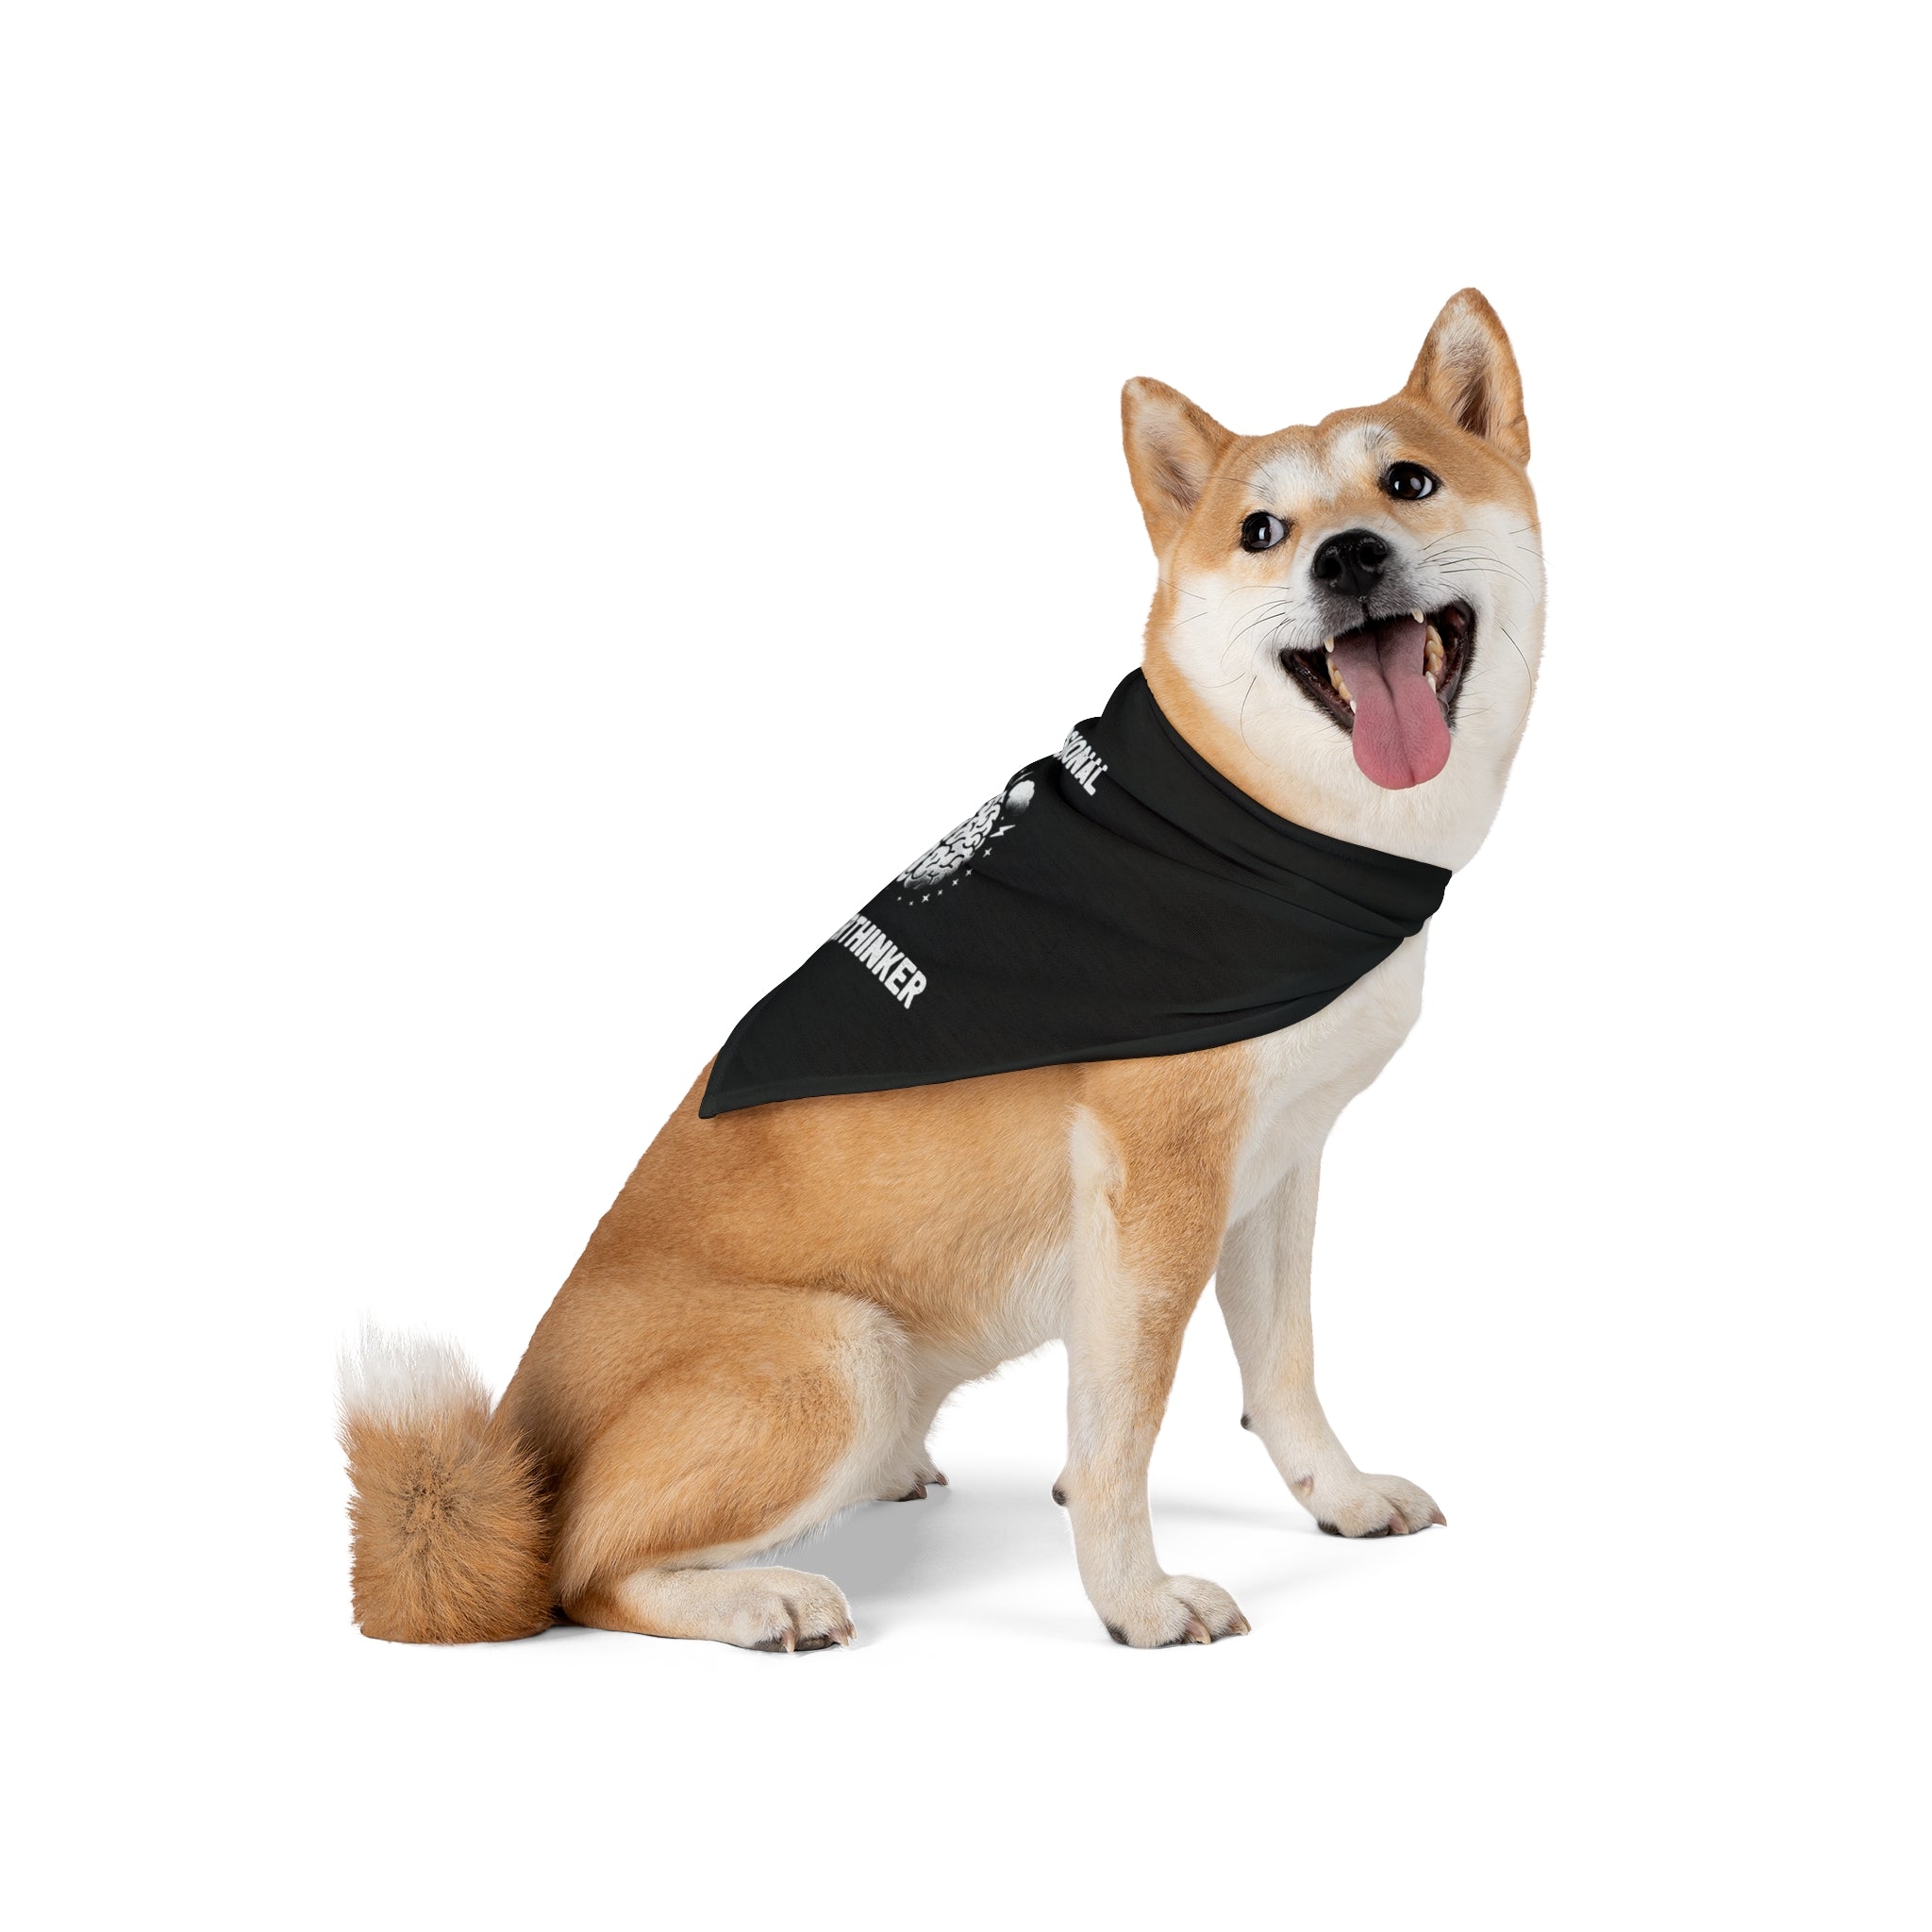 A Shiba Inu dog wearing a black polyester Professional Overthinker - Pet Bandana sits facing slightly to the side, its tongue sticking out.